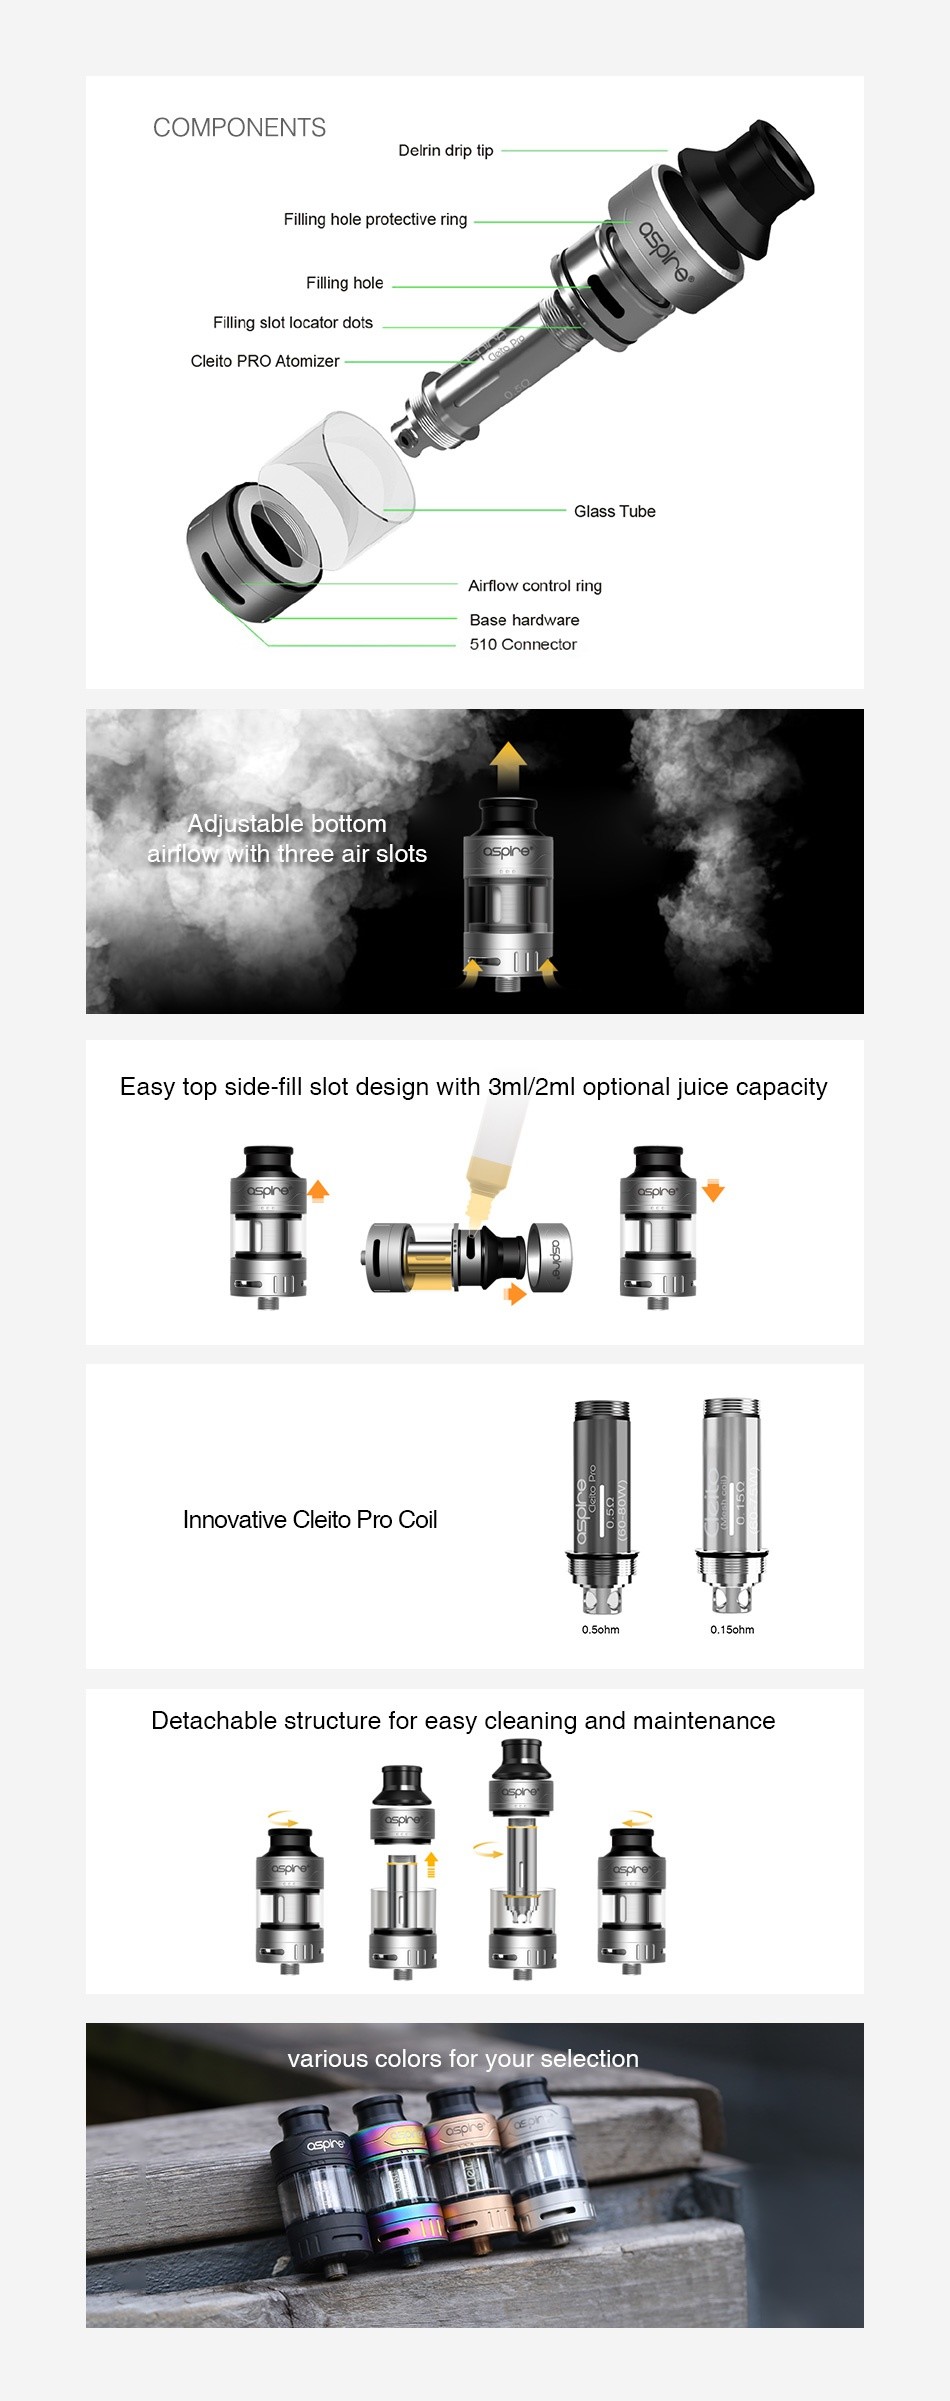 Aspire Cleito Pro Subohm Tank 3ml/2ml COMPONENTS Delrin drip tip protective ring Filling hole Fillirg slot locator dots Cleito PRo Atomizer Glass Tube Airflow control ring Base hardware 510 Connector Adjustable bottom airflow With three air slots Easy top side fill slot design with 3ml 2ml optional juice capacity Innovative Cleito Pro coil Detachable structure for easy cleaning and maintenance   various colors for your selection